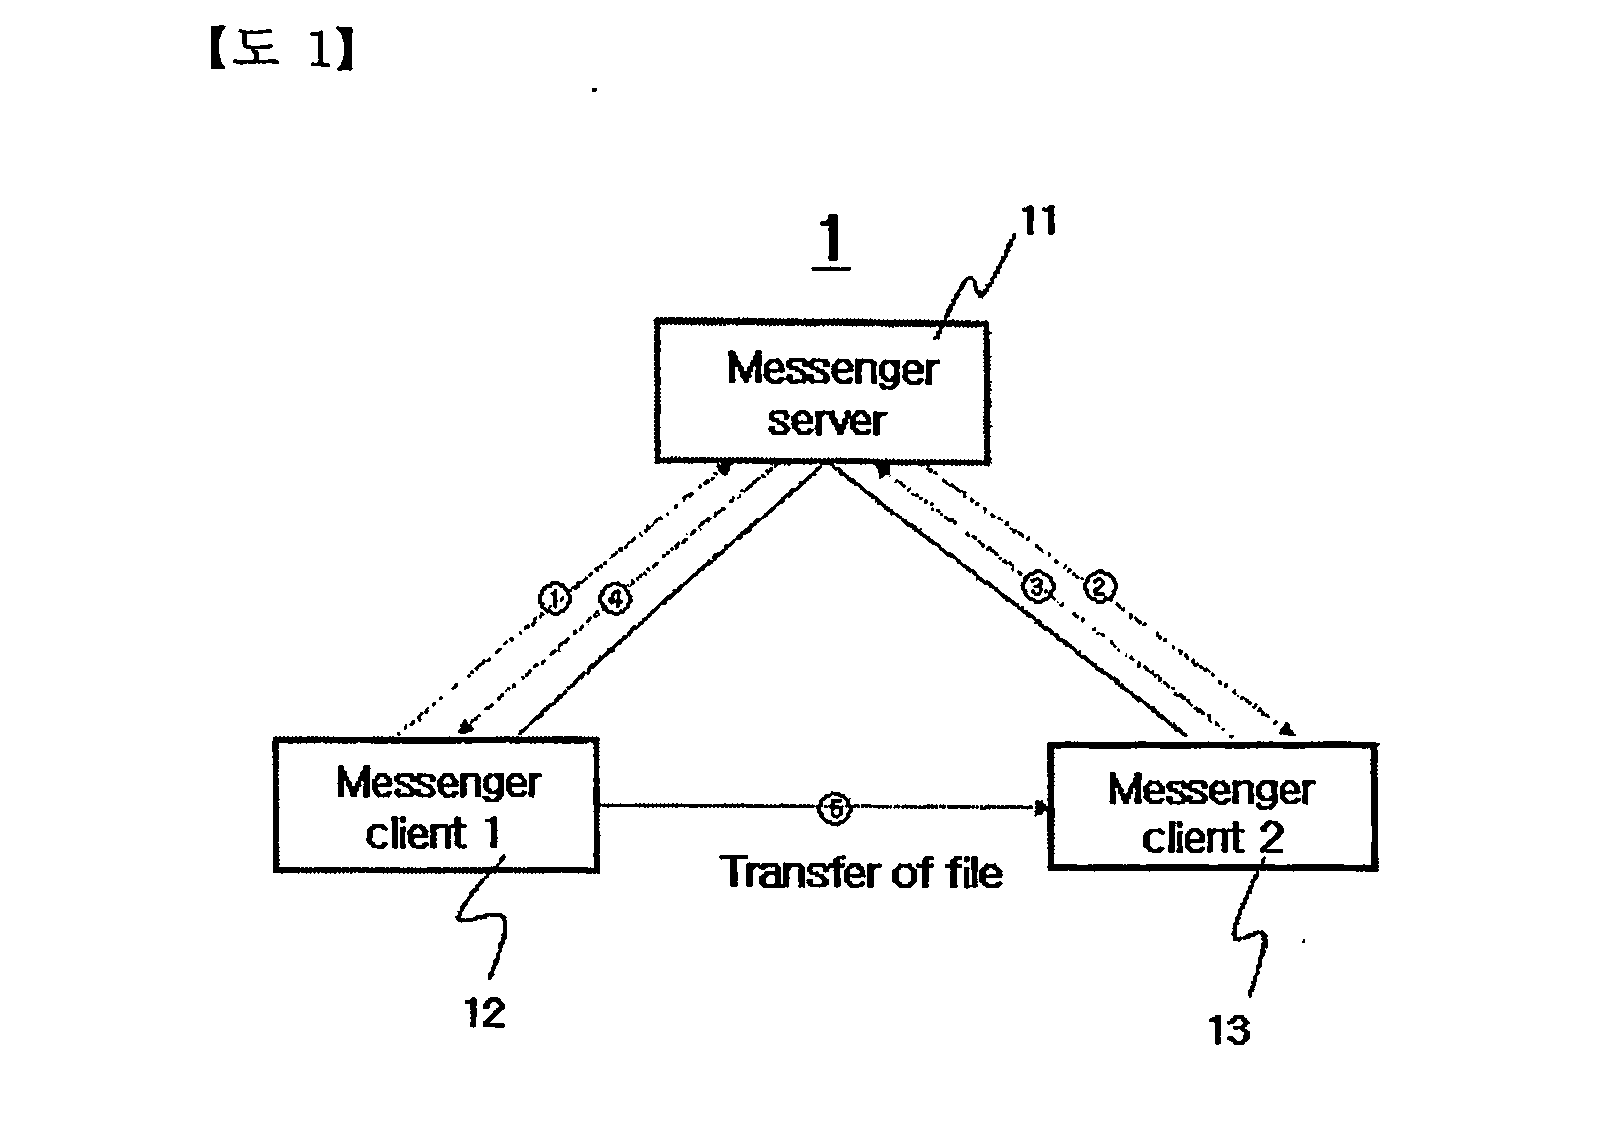 System and method for storing and transmitting a file data using internet messenger